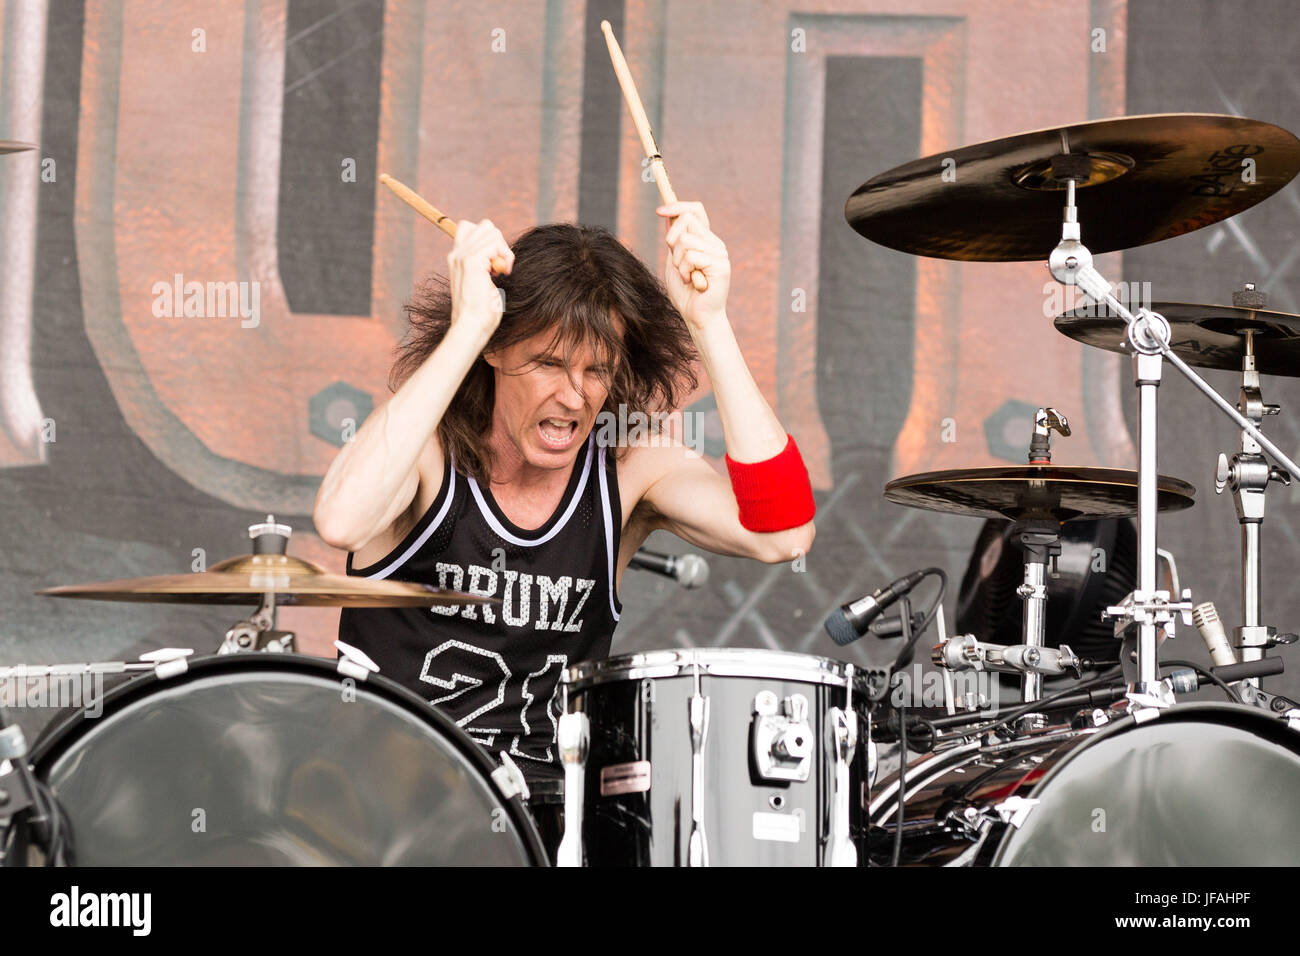 Milwaukee, Wisconsin, USA. 29th June, 2017. ZOLTAN CHANEY of Slaughter performs live at Henry Maier Festival Park during Summerfest in Milwaukee, Wisconsin Credit: Daniel DeSlover/ZUMA Wire/Alamy Live News Stock Photo